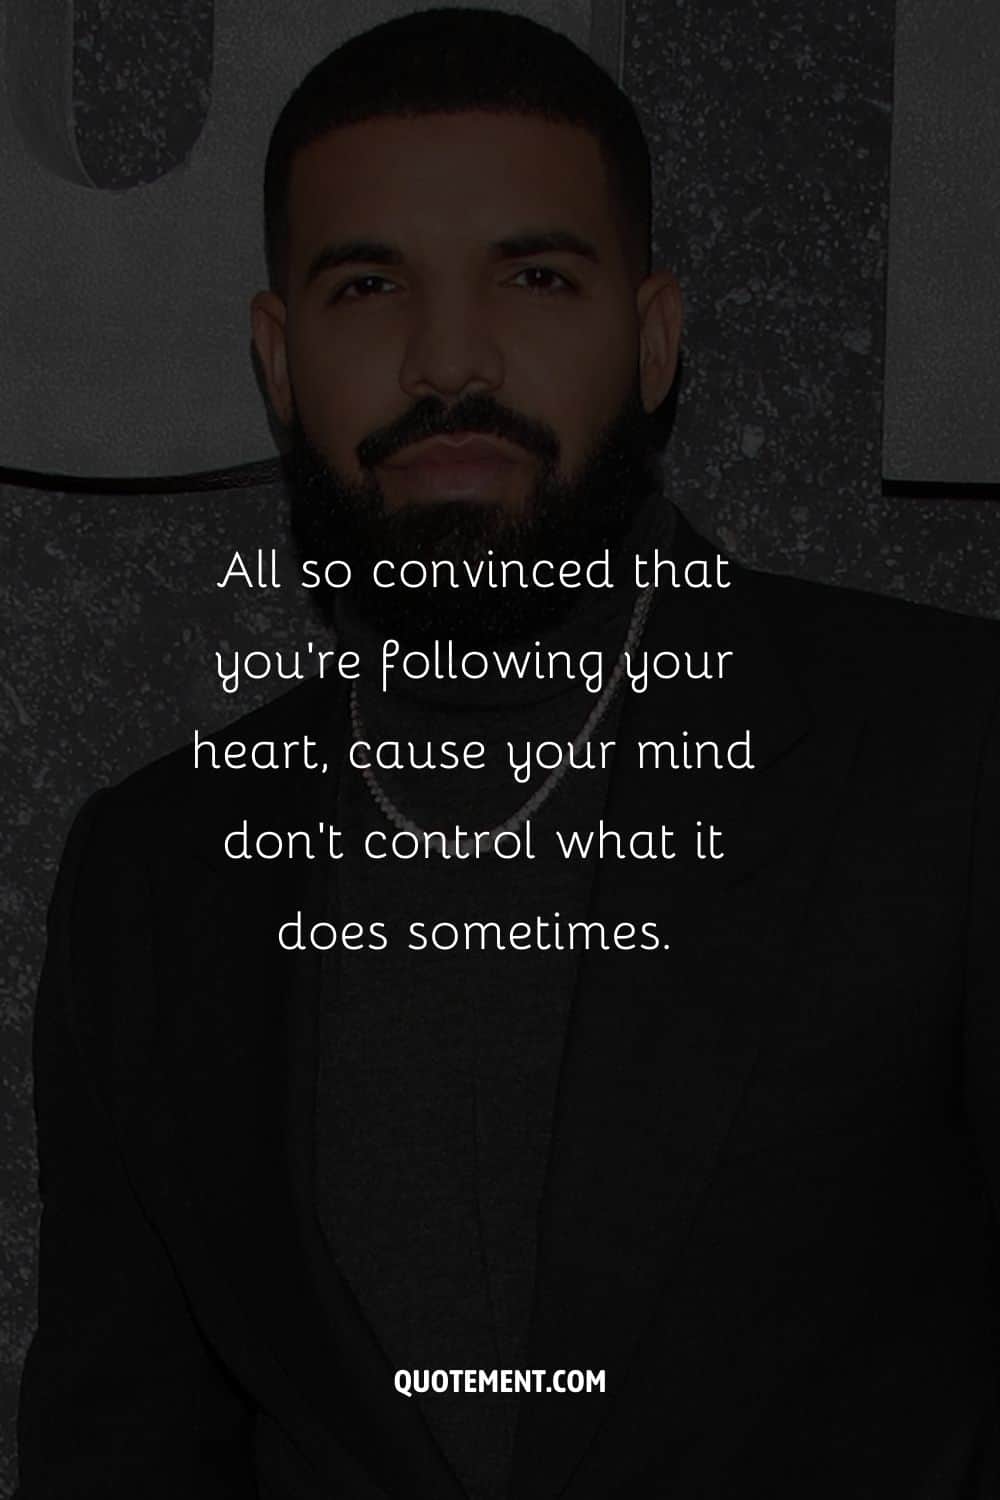 All so convinced that you’re following your heart, cause your mind don’t control what it does sometimes.